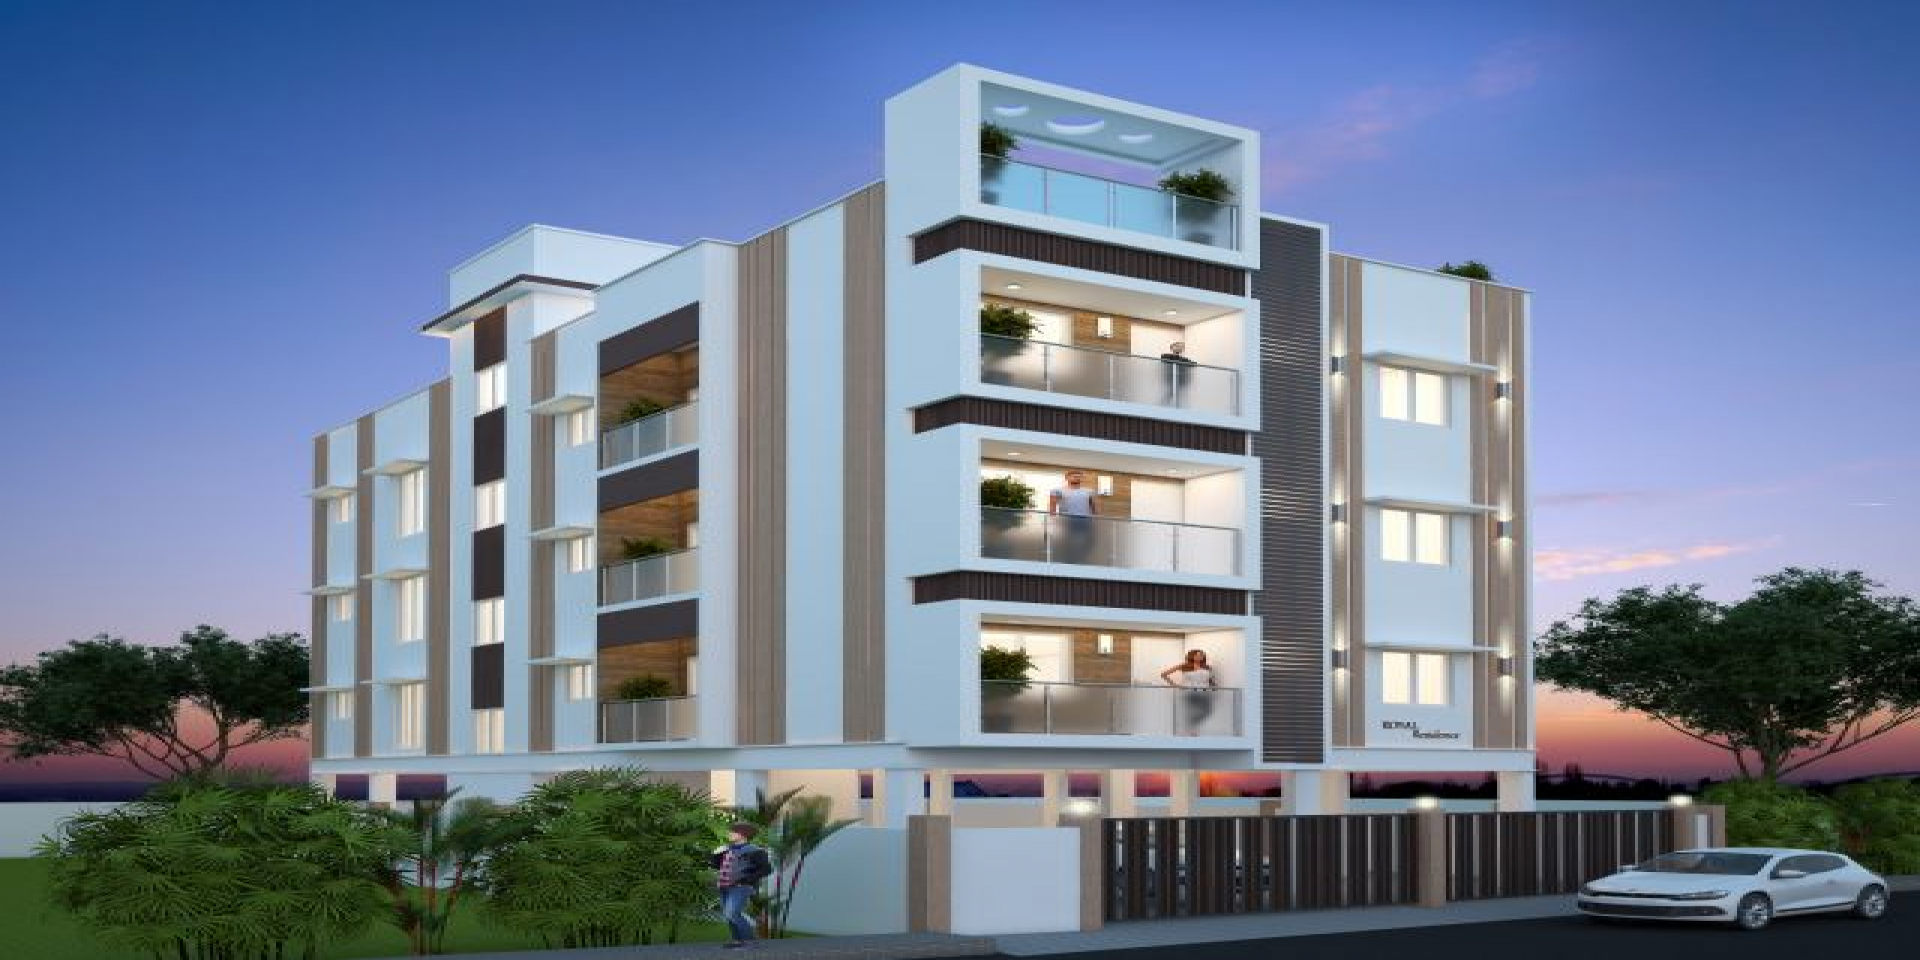 2, 3 BHK Apartment for sale in Thoraipakkam